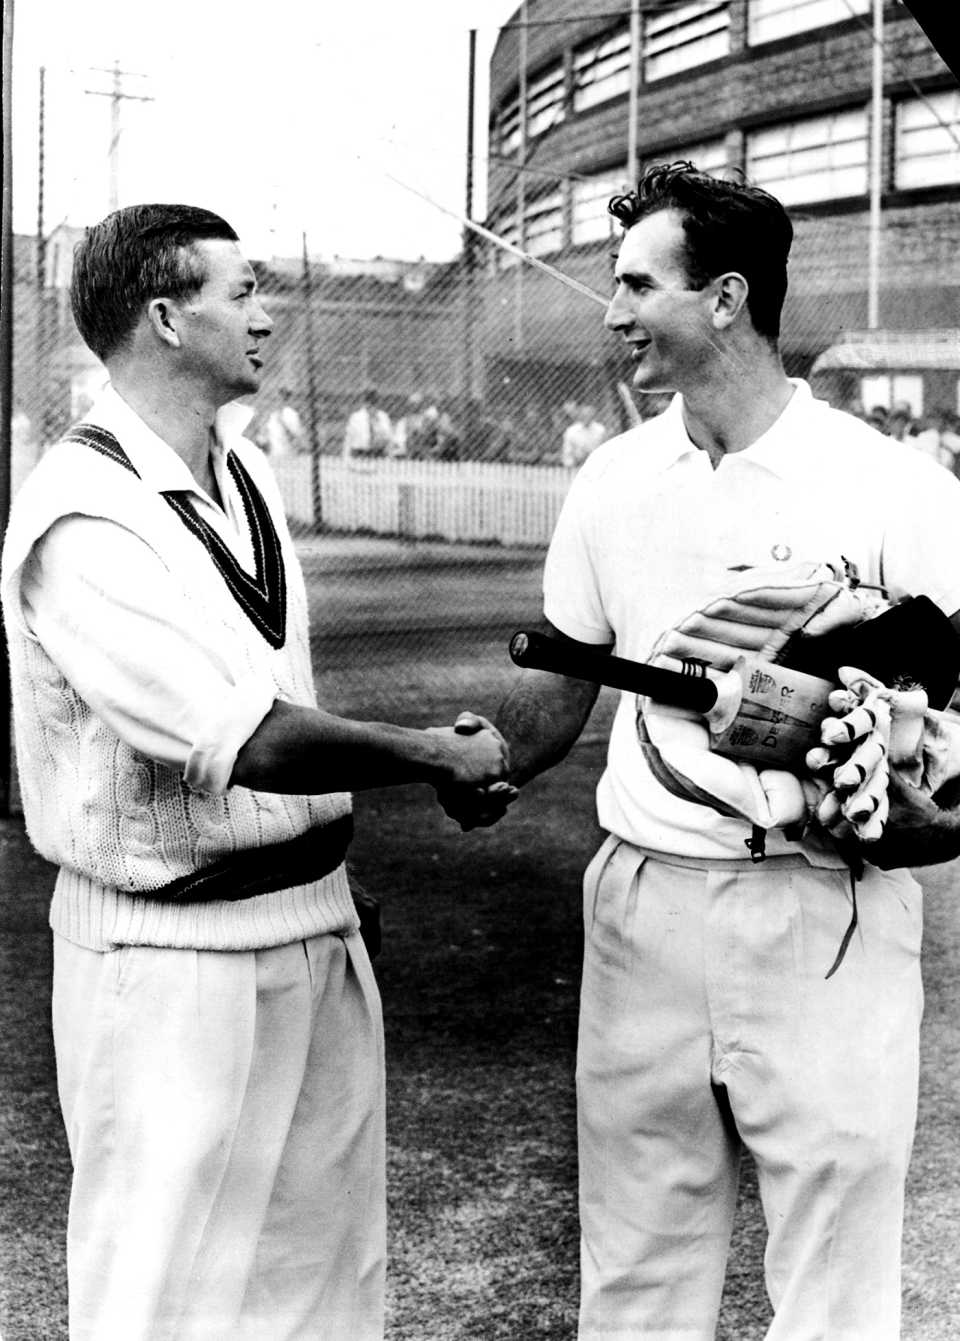 Richie Benuad and Ted Dexter shake hands, Sydney, February 1963